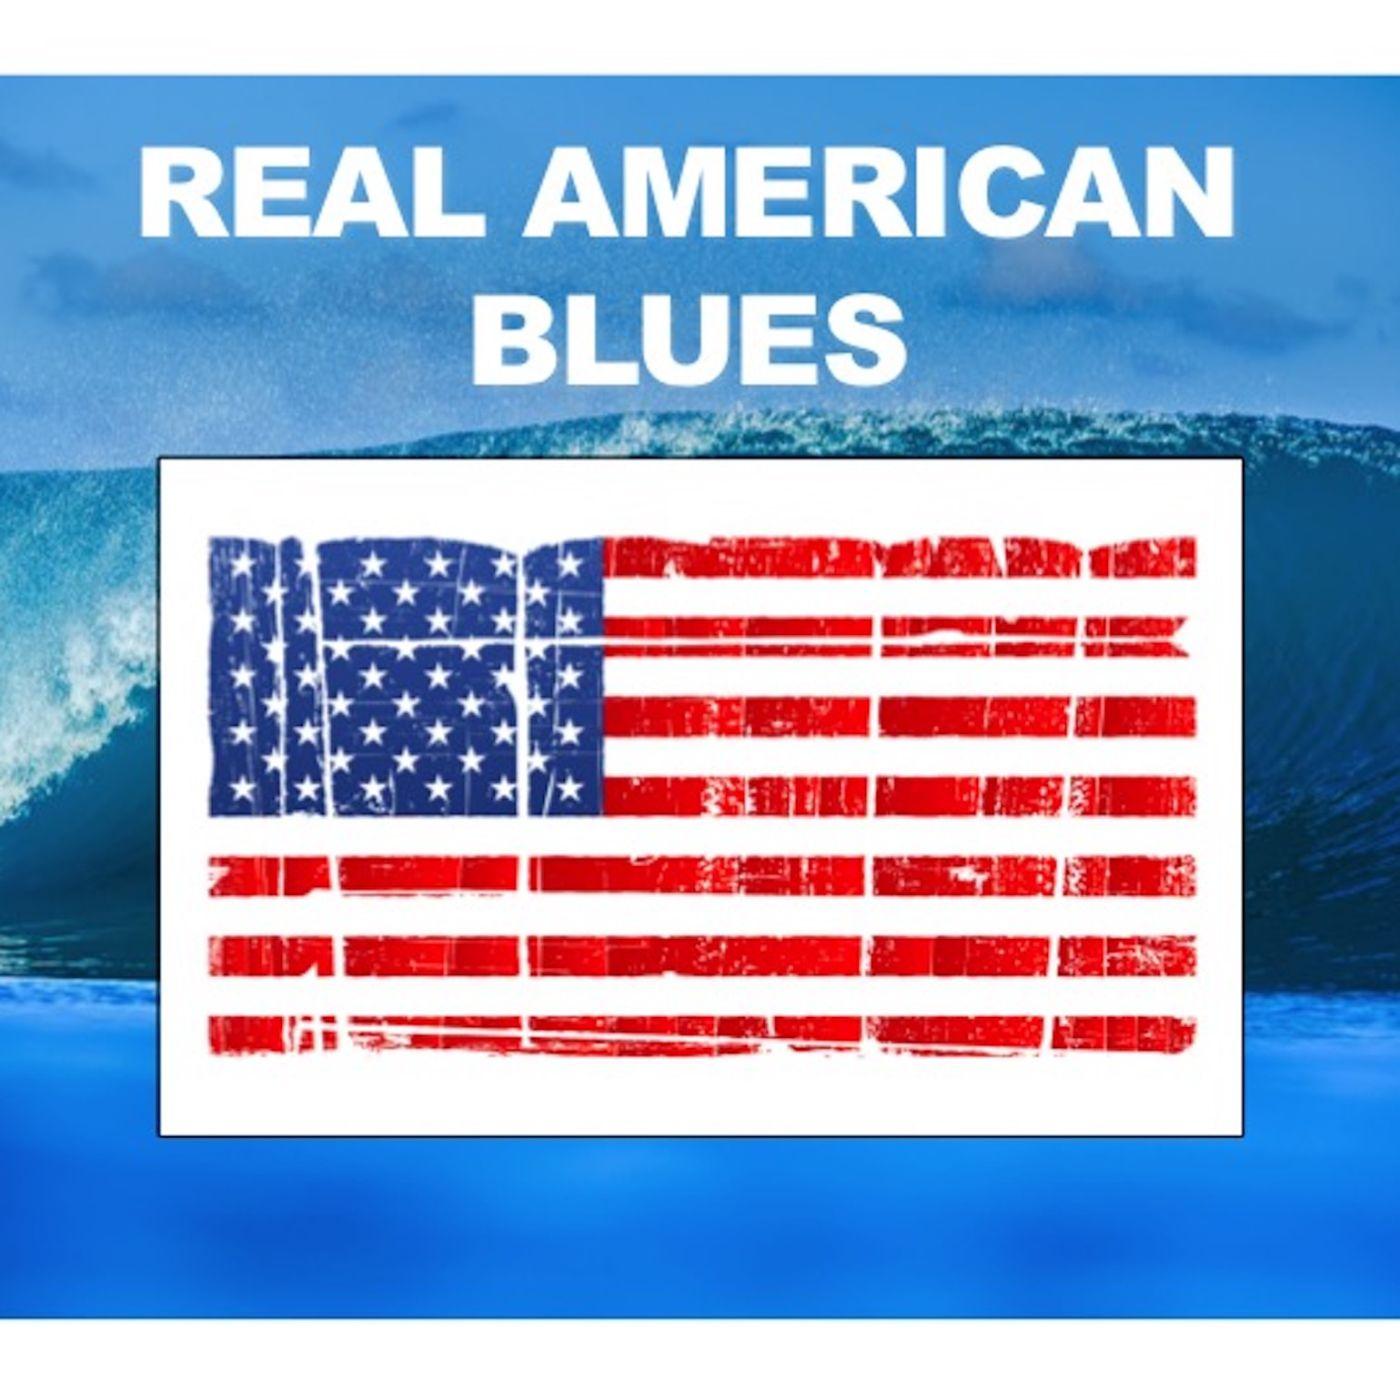 Real American Blues